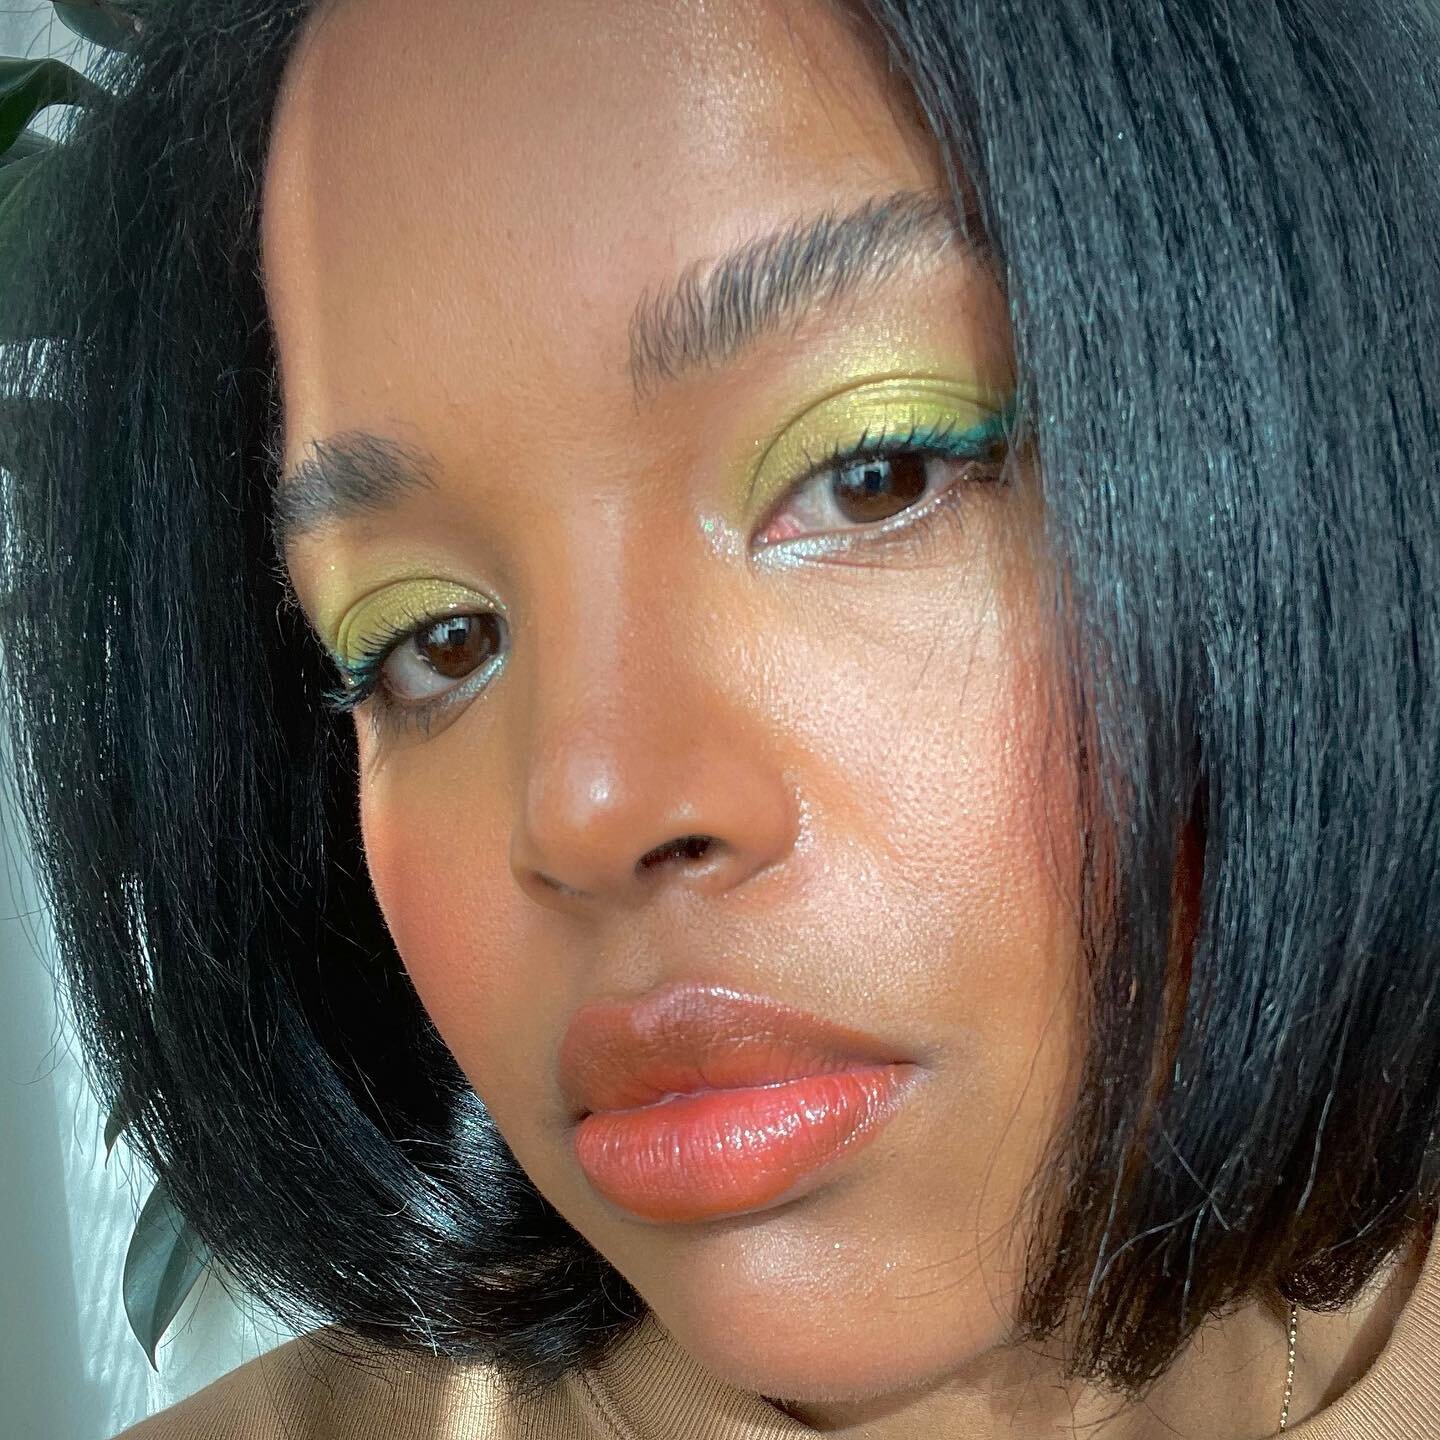 New #greenmakeuplook on my YouTube in collaboration with @keepingupwitbb 🤗
Thanks so much for pushing me out of my comfort zone BB 💚

Makeup details ⤵️

@revlon Colorstay Looks Book Palette in 910 Player
@iliabeauty Super Serum Skin Tint SPF 40 in 